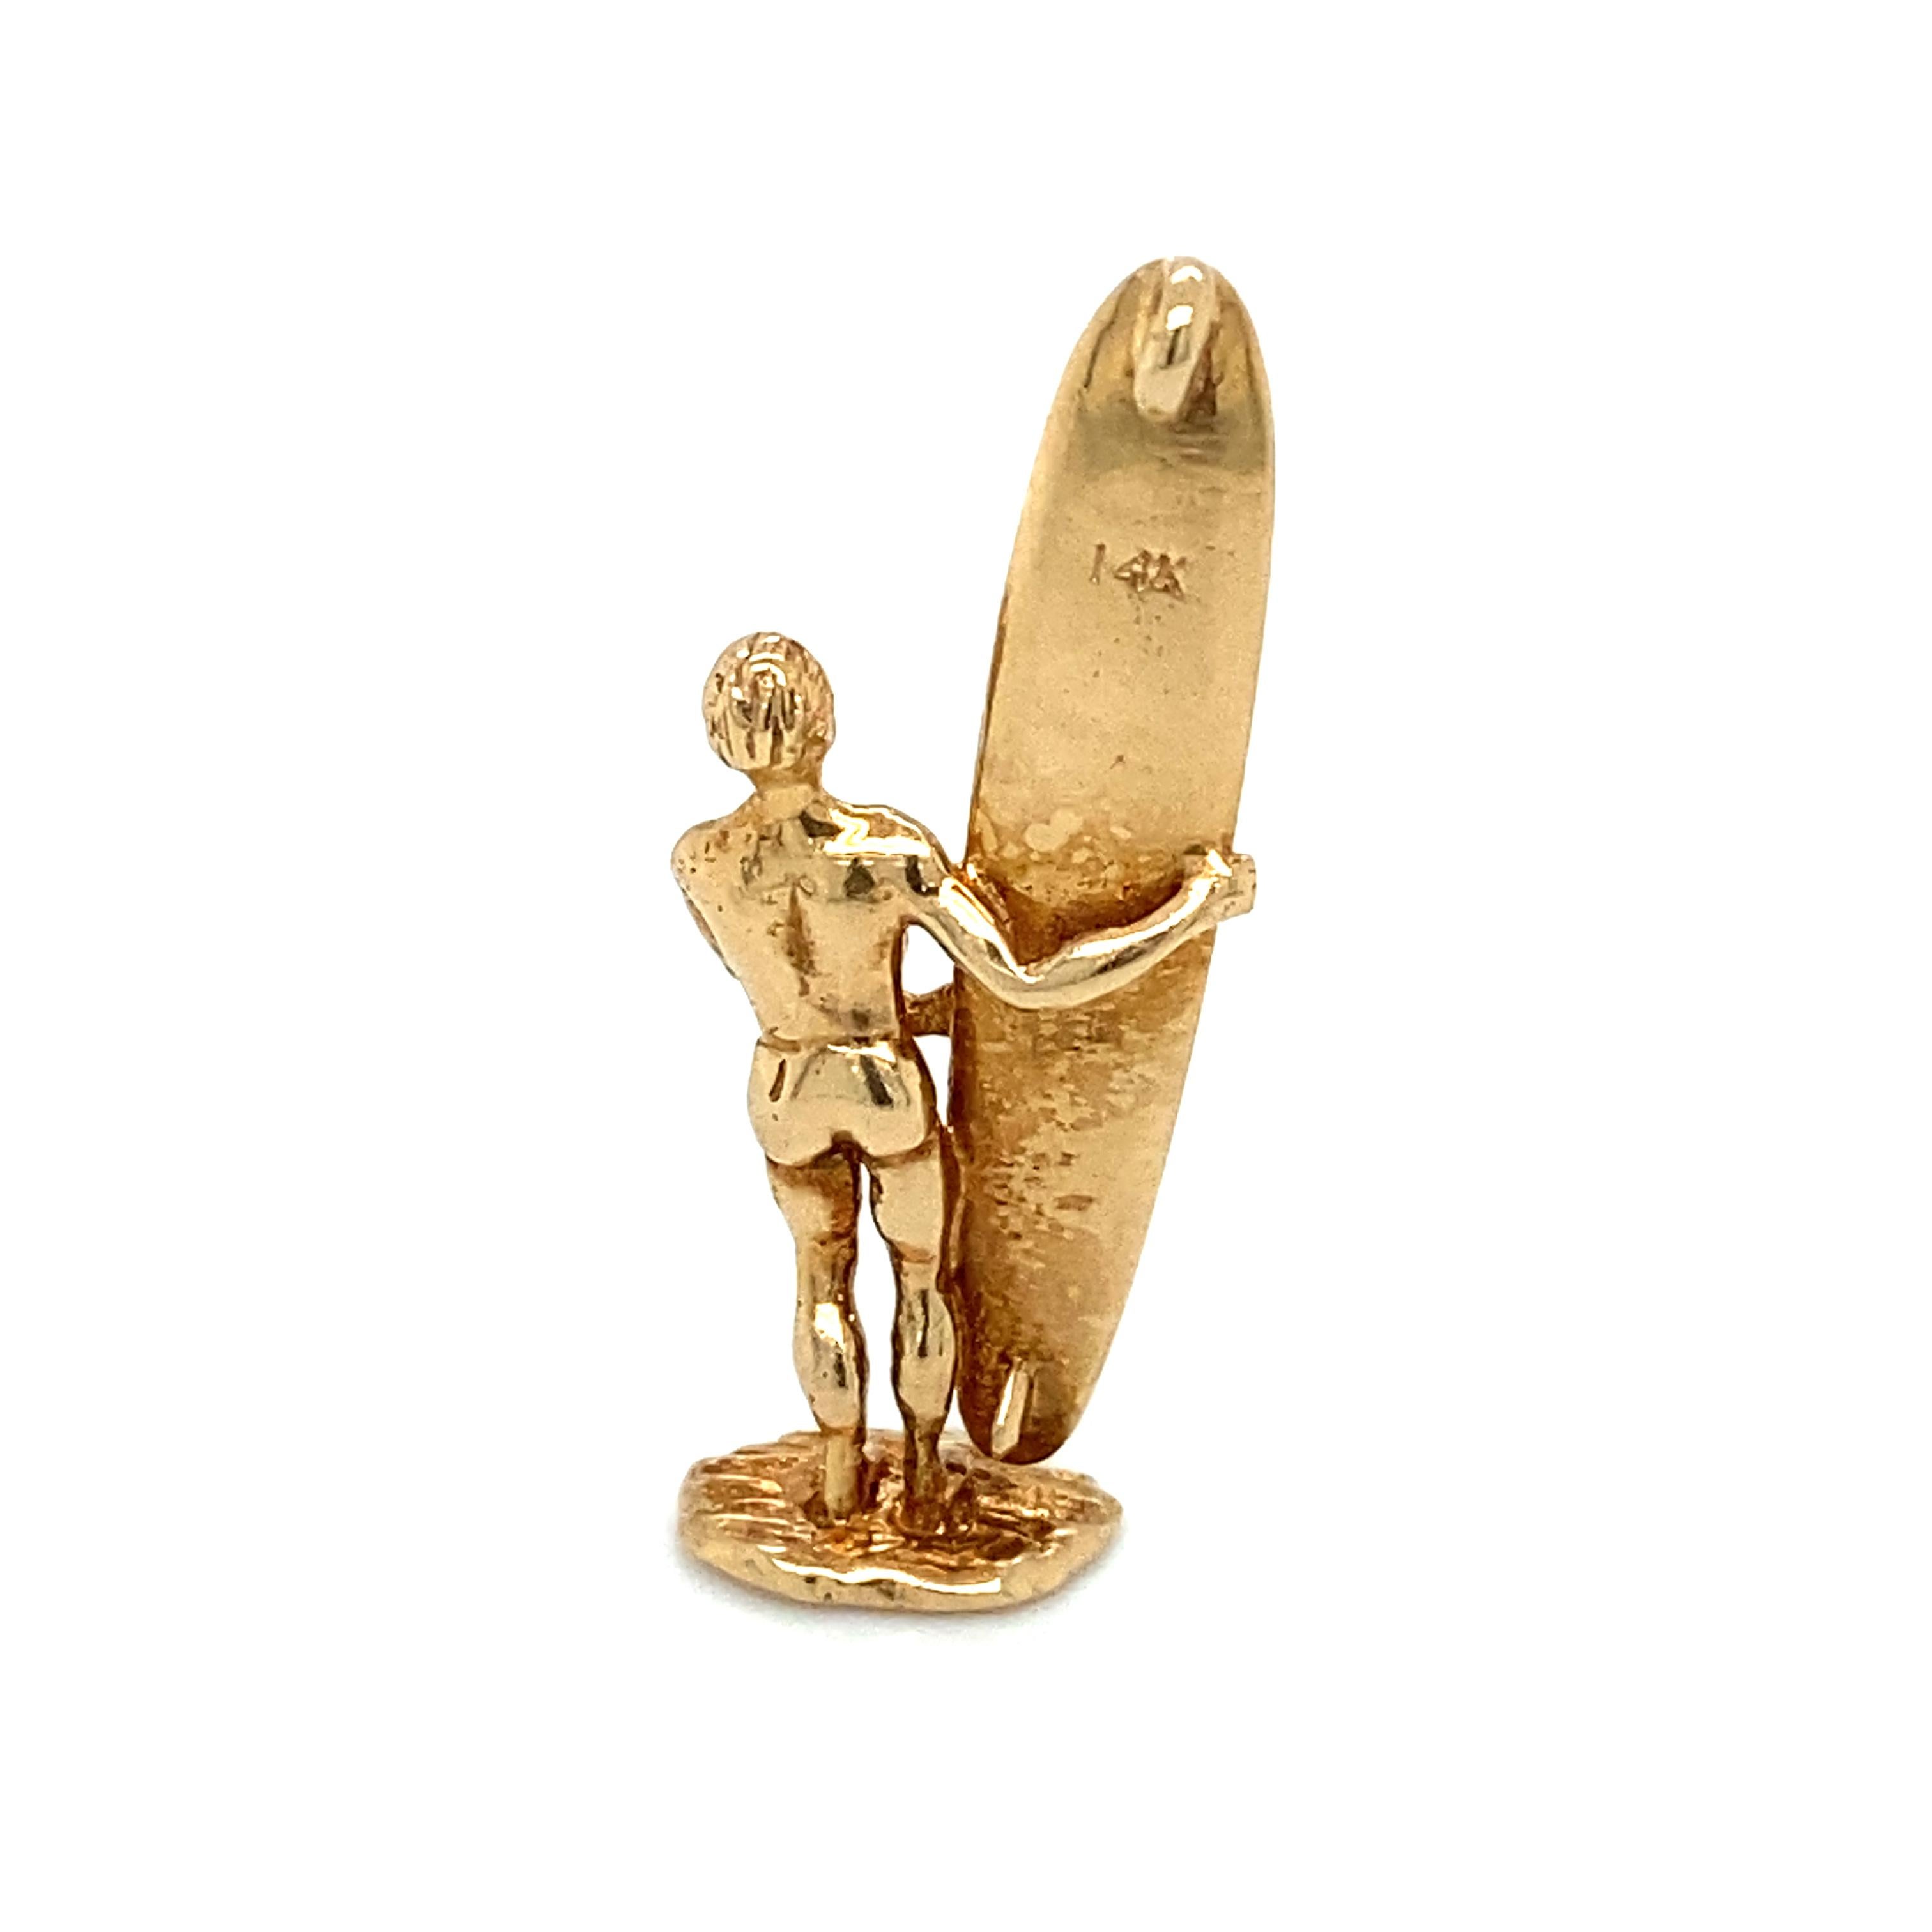 Item Details: This whimsical travel souvenir from Waikiki Beach in Hawaii features a surfer with his surfboard. Crafted in 14 karat yellow gold, it makes a wonderful charm or pendant.

Circa: 2000s
Metal Type: 14 Karat Gold
Weight: 3.0 grams
Size: